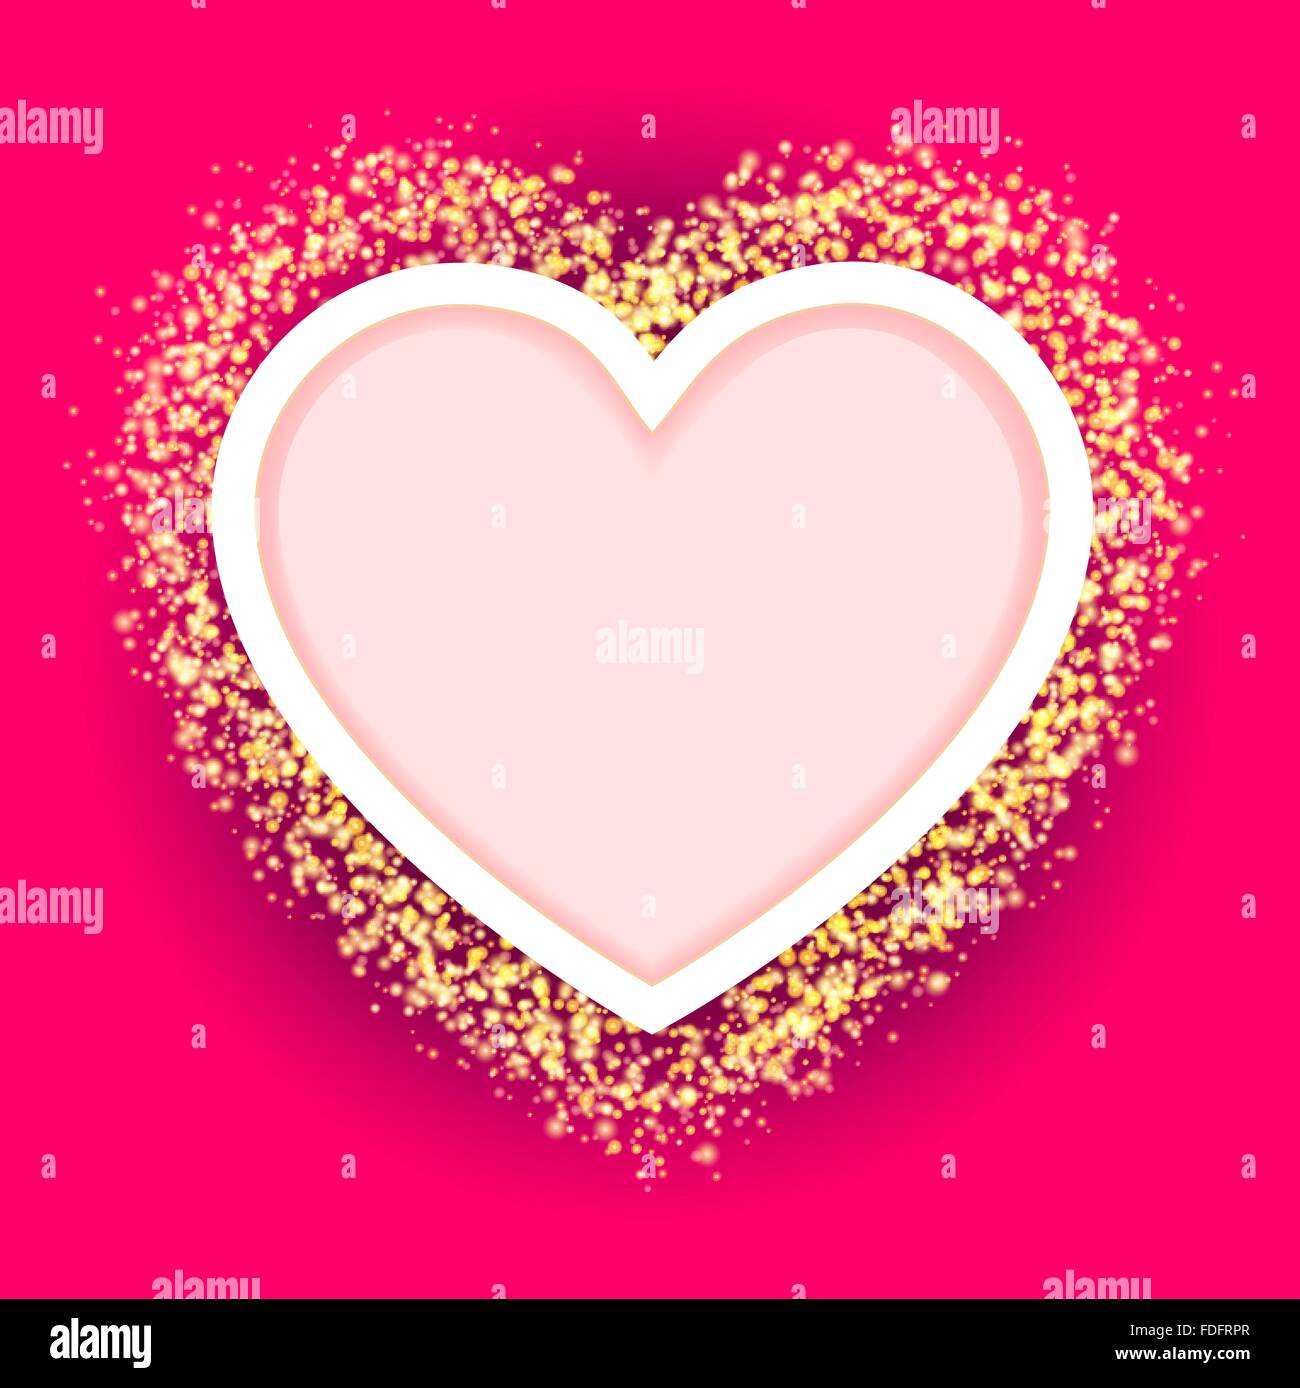 pink heart frame with glittering golden transparent particles. vector Stock Vector